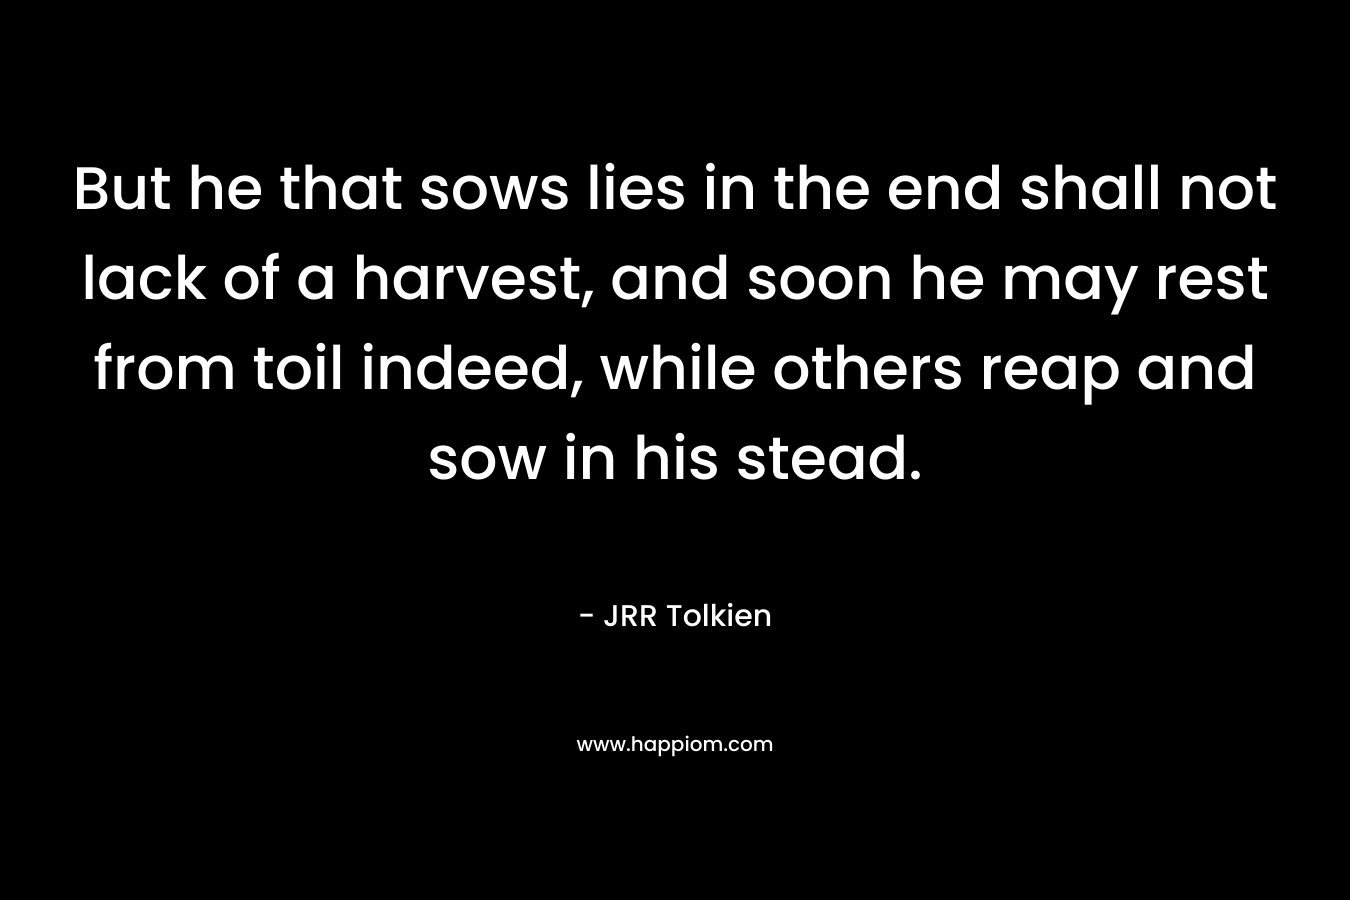 But he that sows lies in the end shall not lack of a harvest, and soon he may rest from toil indeed, while others reap and sow in his stead. – JRR Tolkien